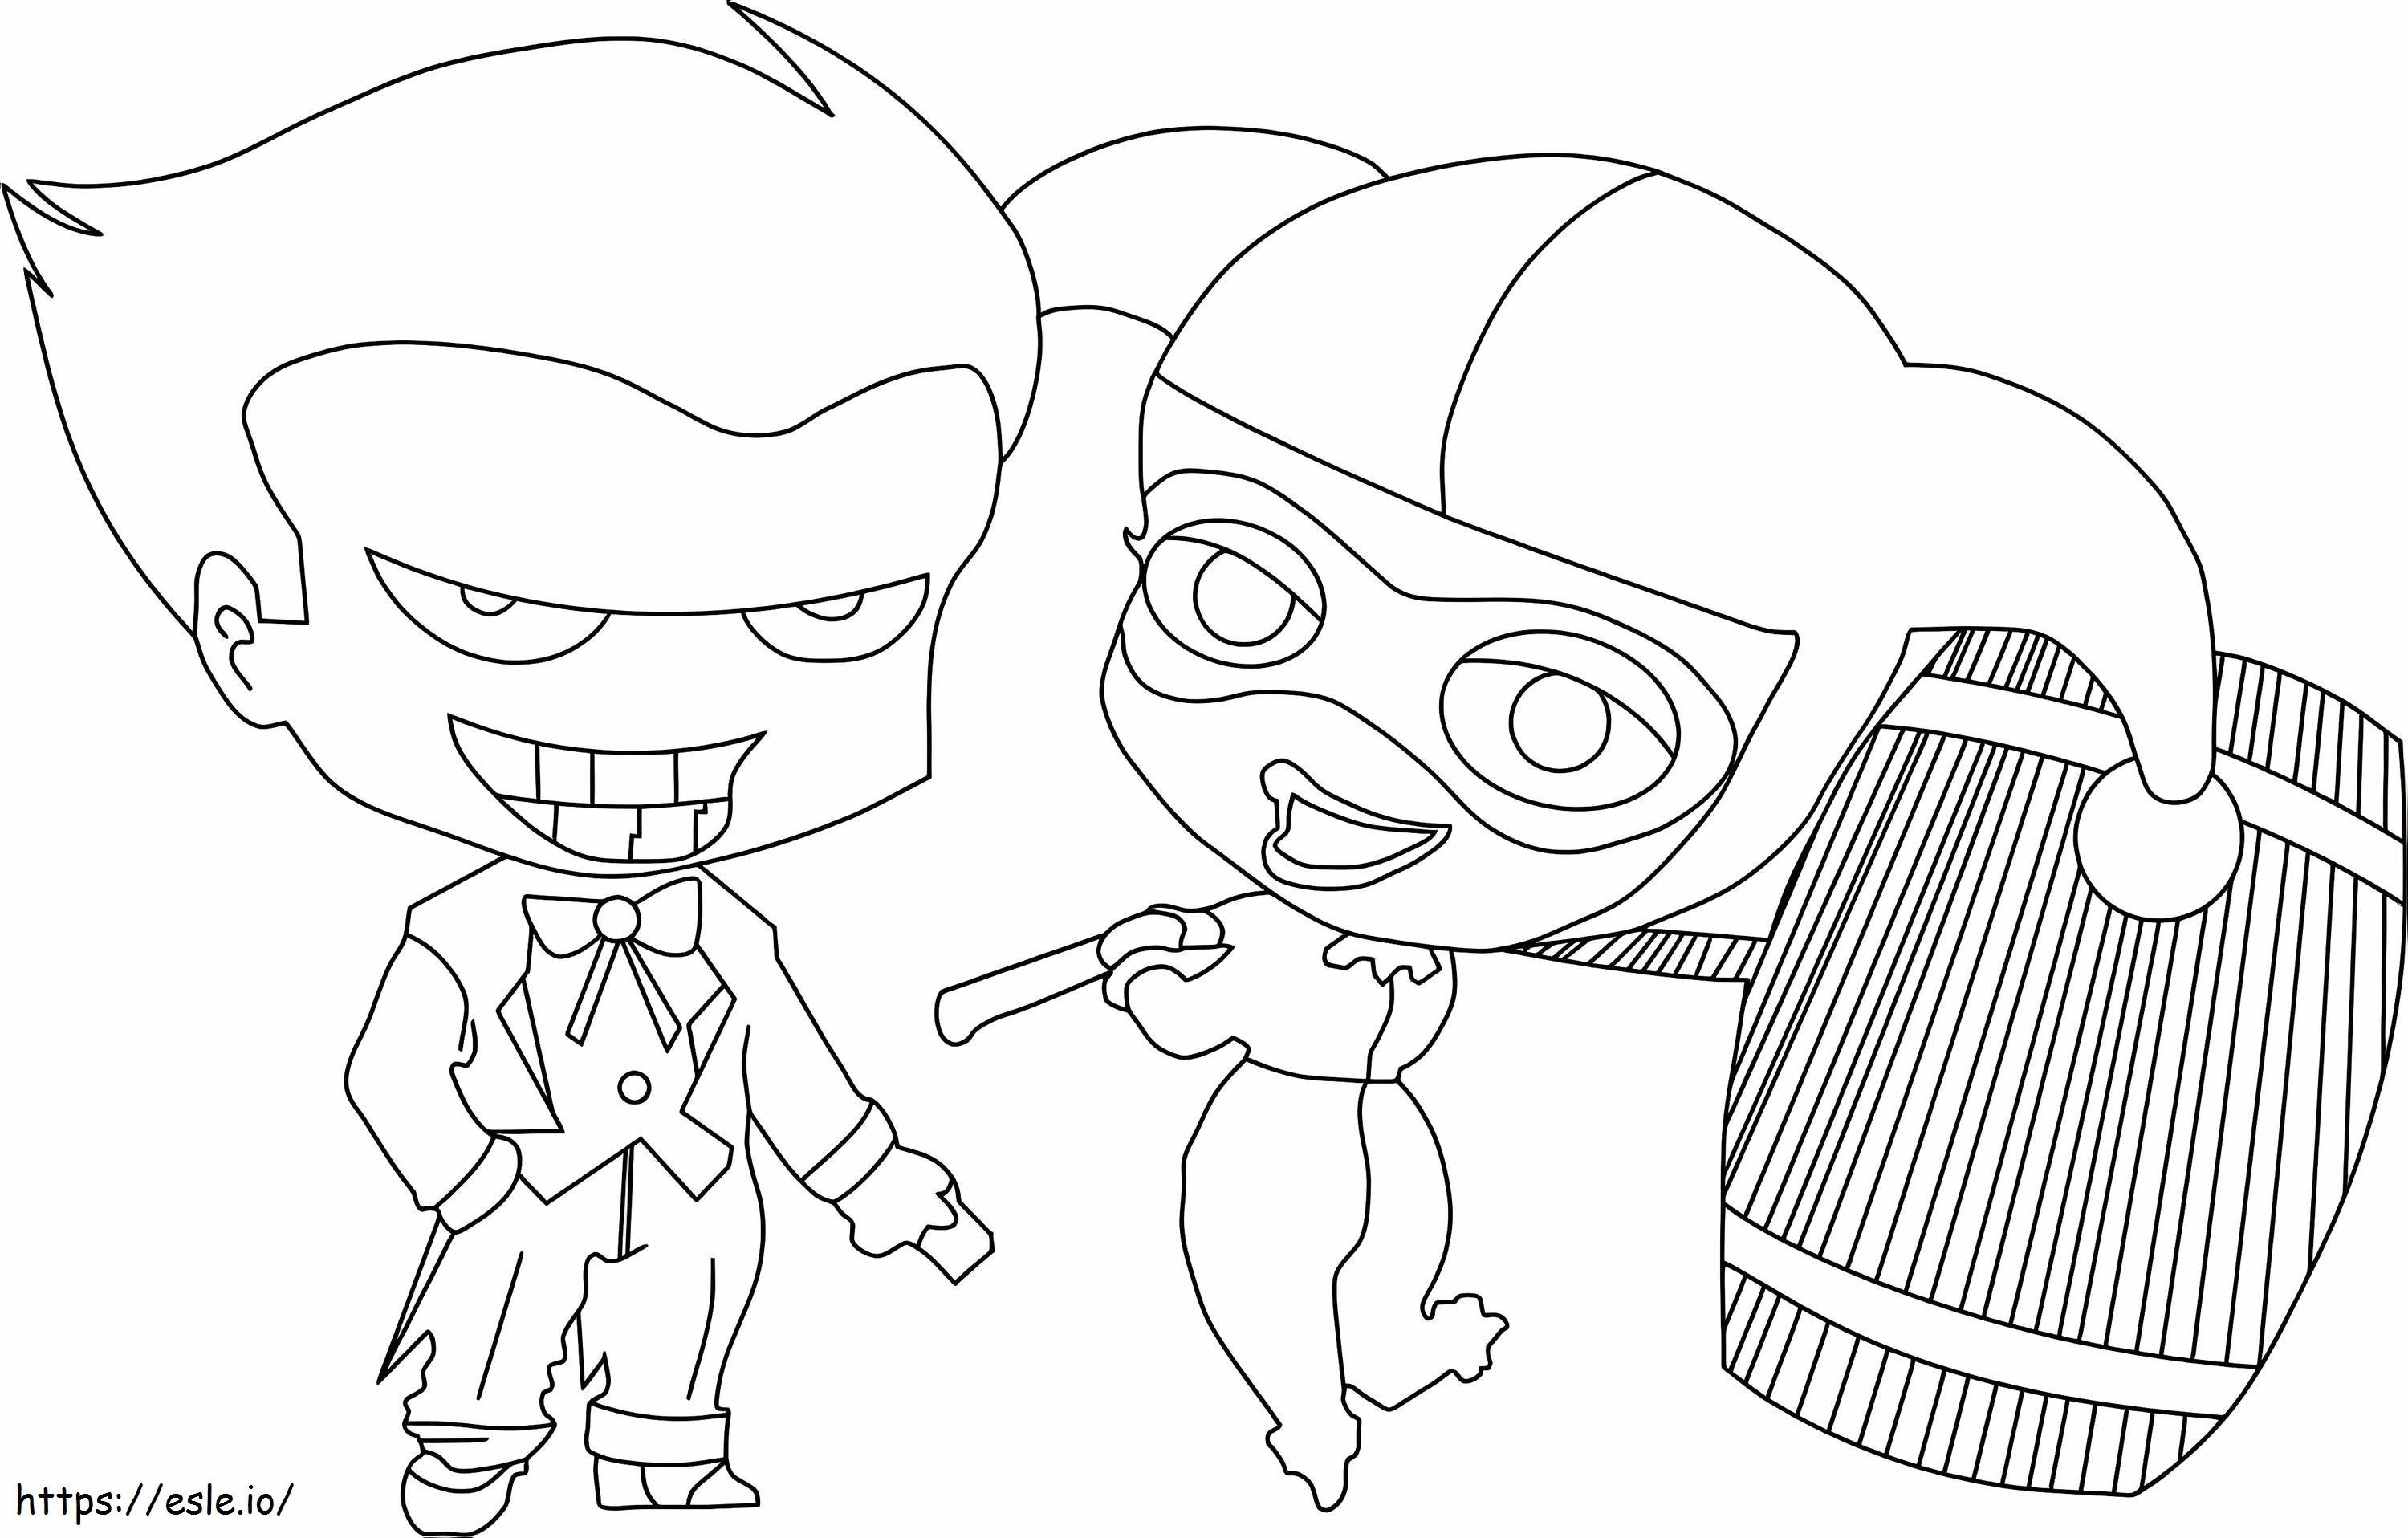 Chibi Joker And Chibi Harley Quinn Holding A Hammer coloring page